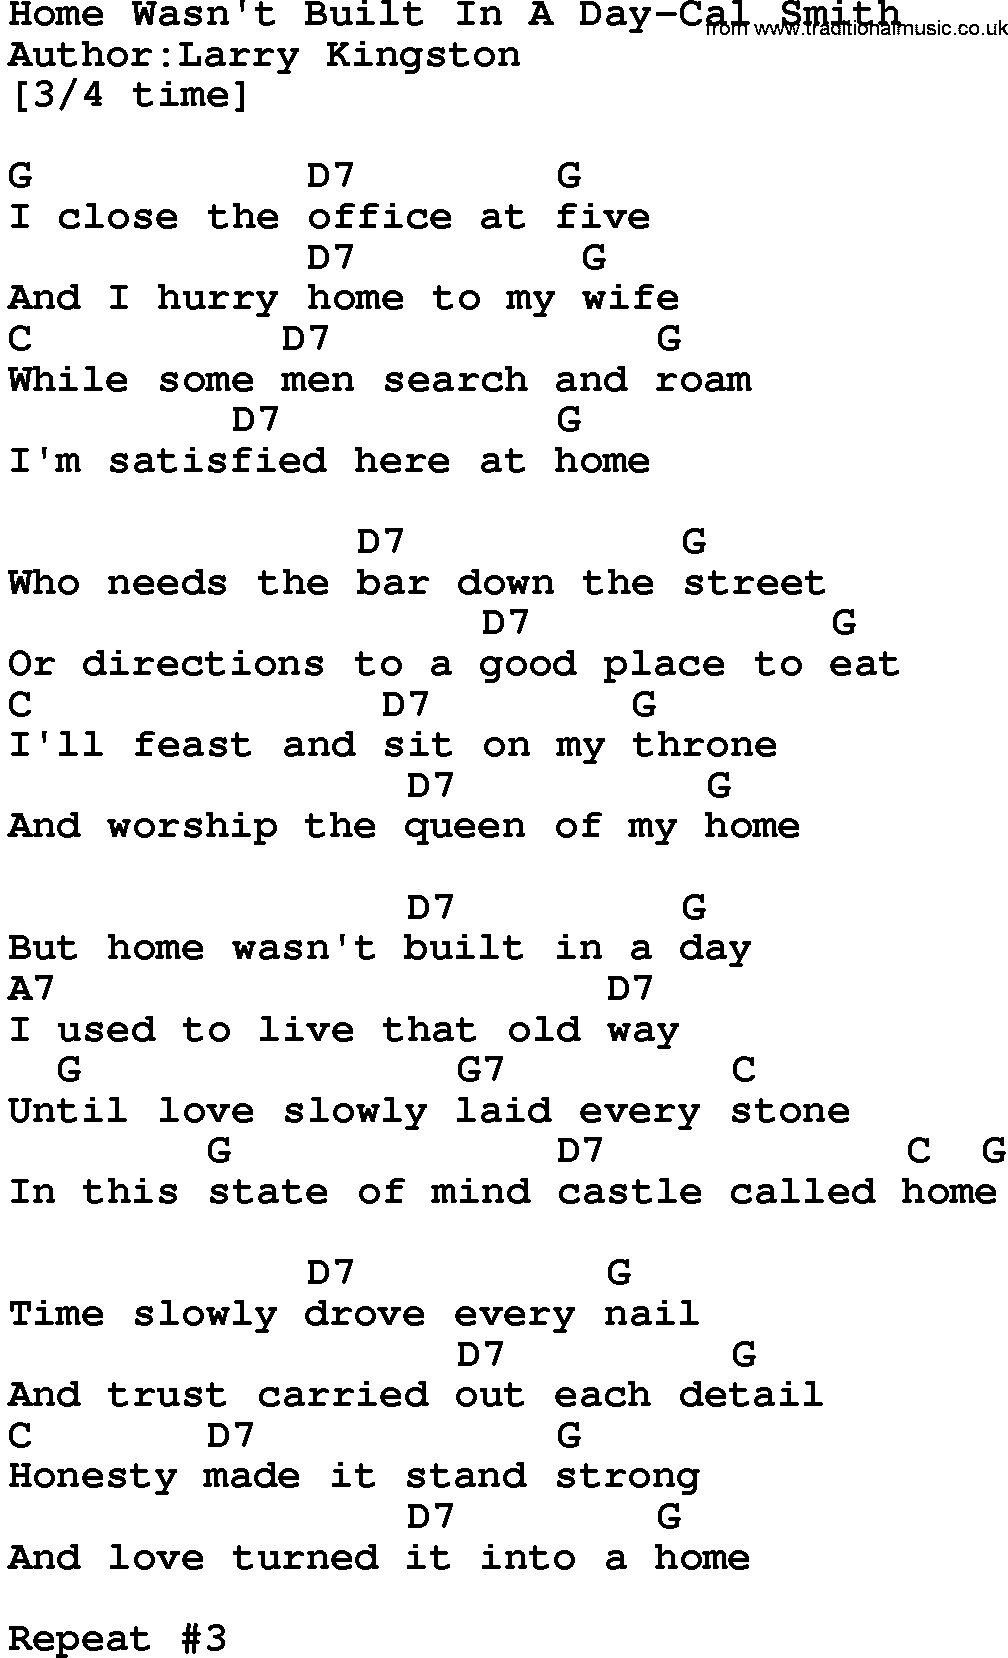 Country music song: Home Wasn't Built In A Day-Cal Smith lyrics and chords